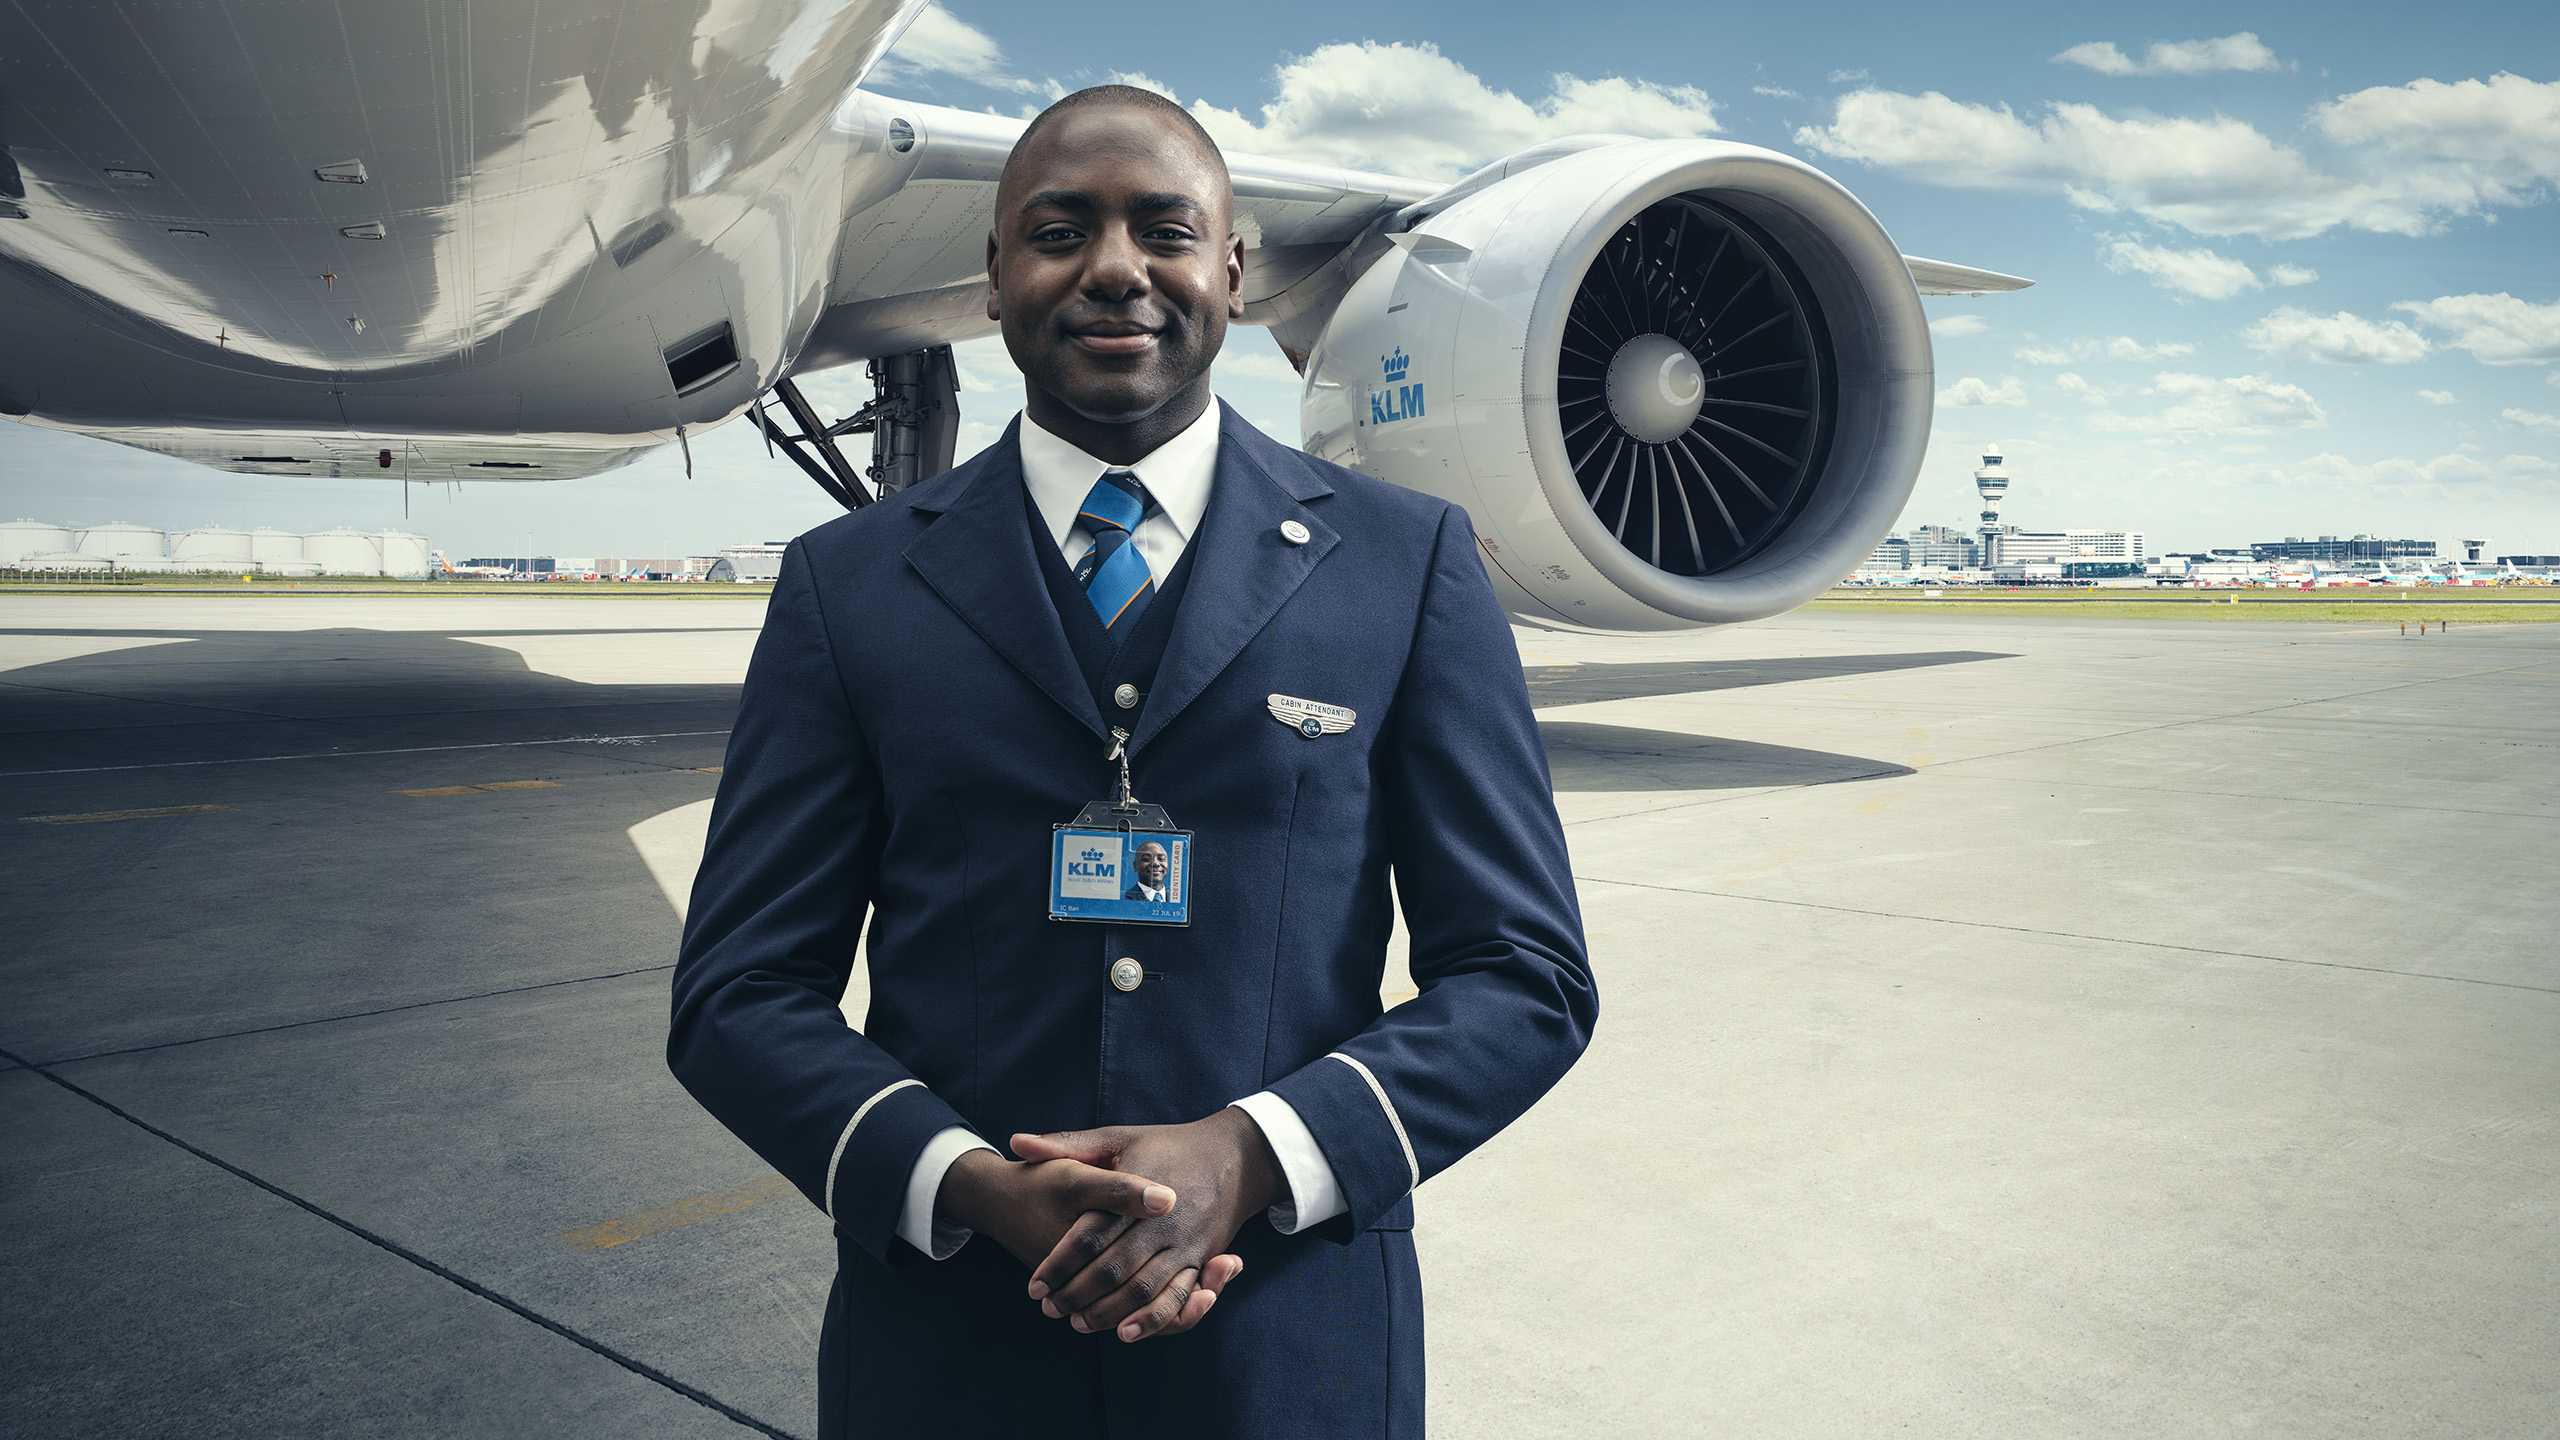 KLM-branding-photography-employer-divisions-work